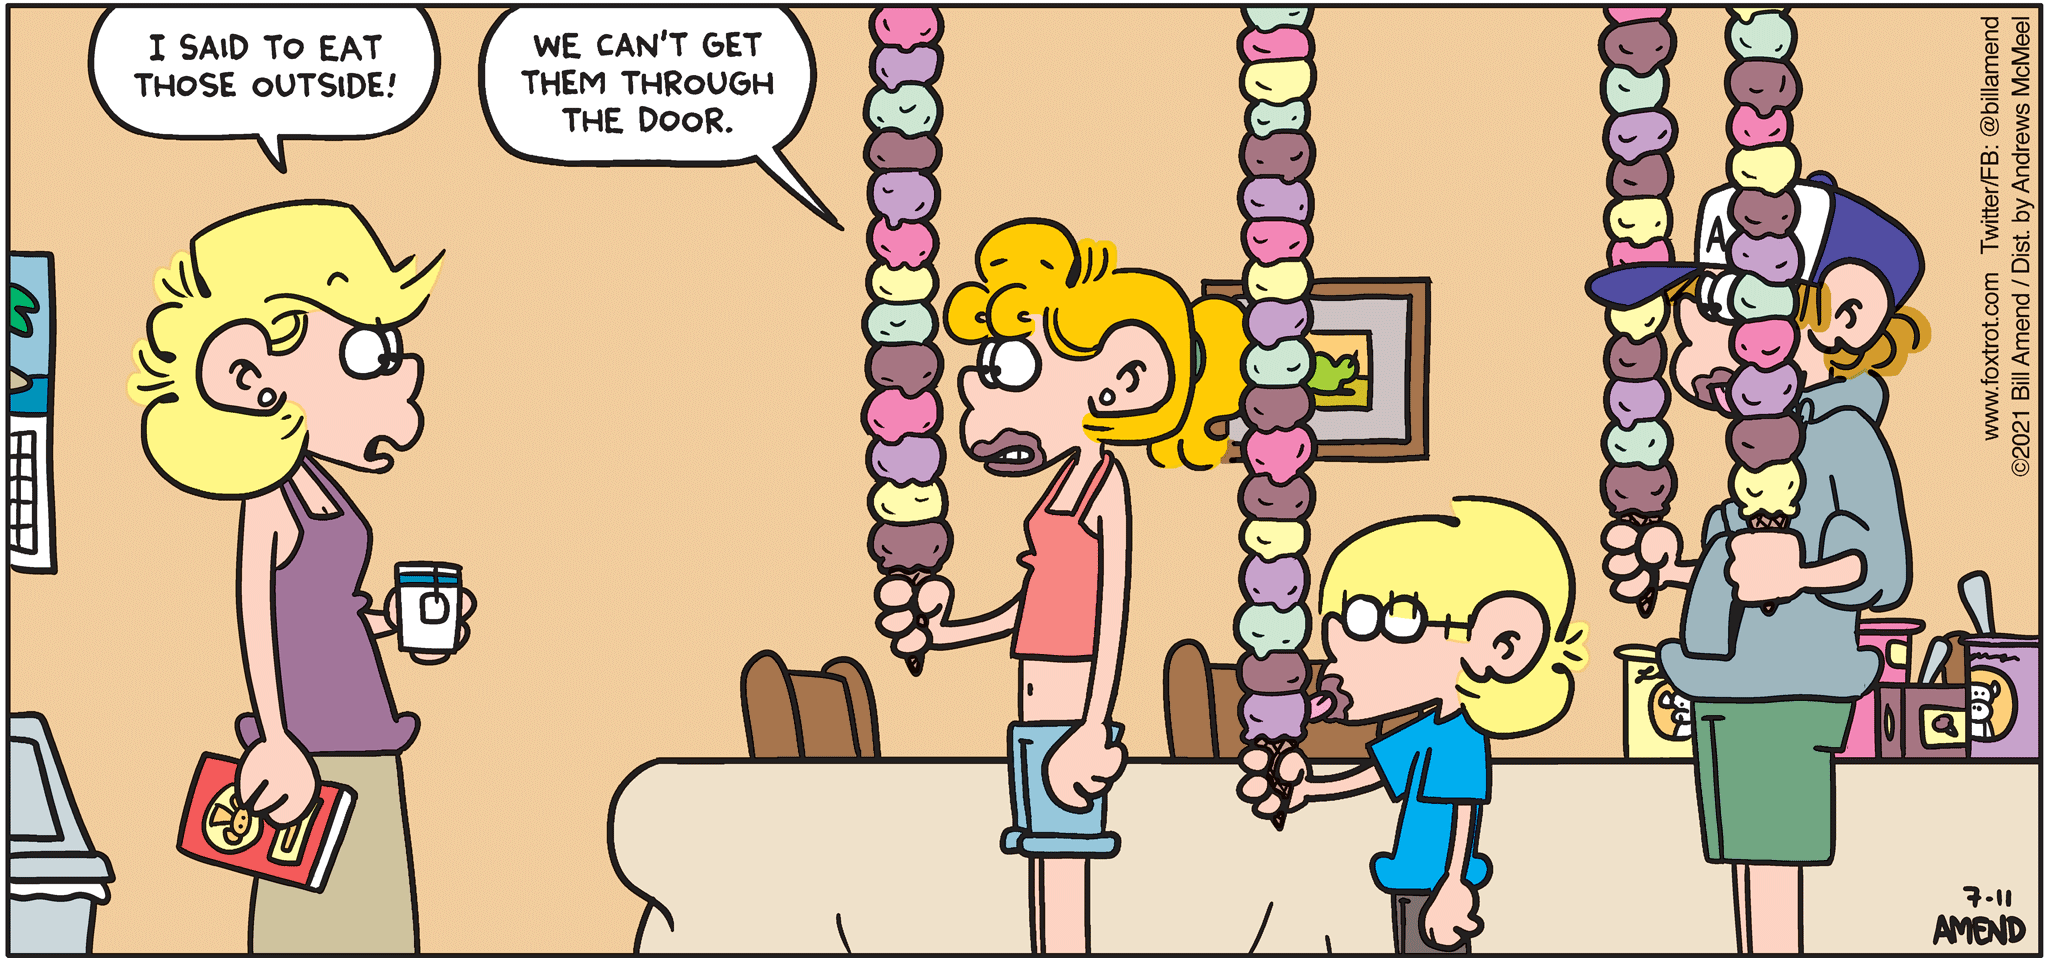 FoxTrot comic strip by Bill Amend - "Tall Order" published July 11, 2021 - Andy Fox: I said to eat those outside! Paige Fox: we can't get them through the door.